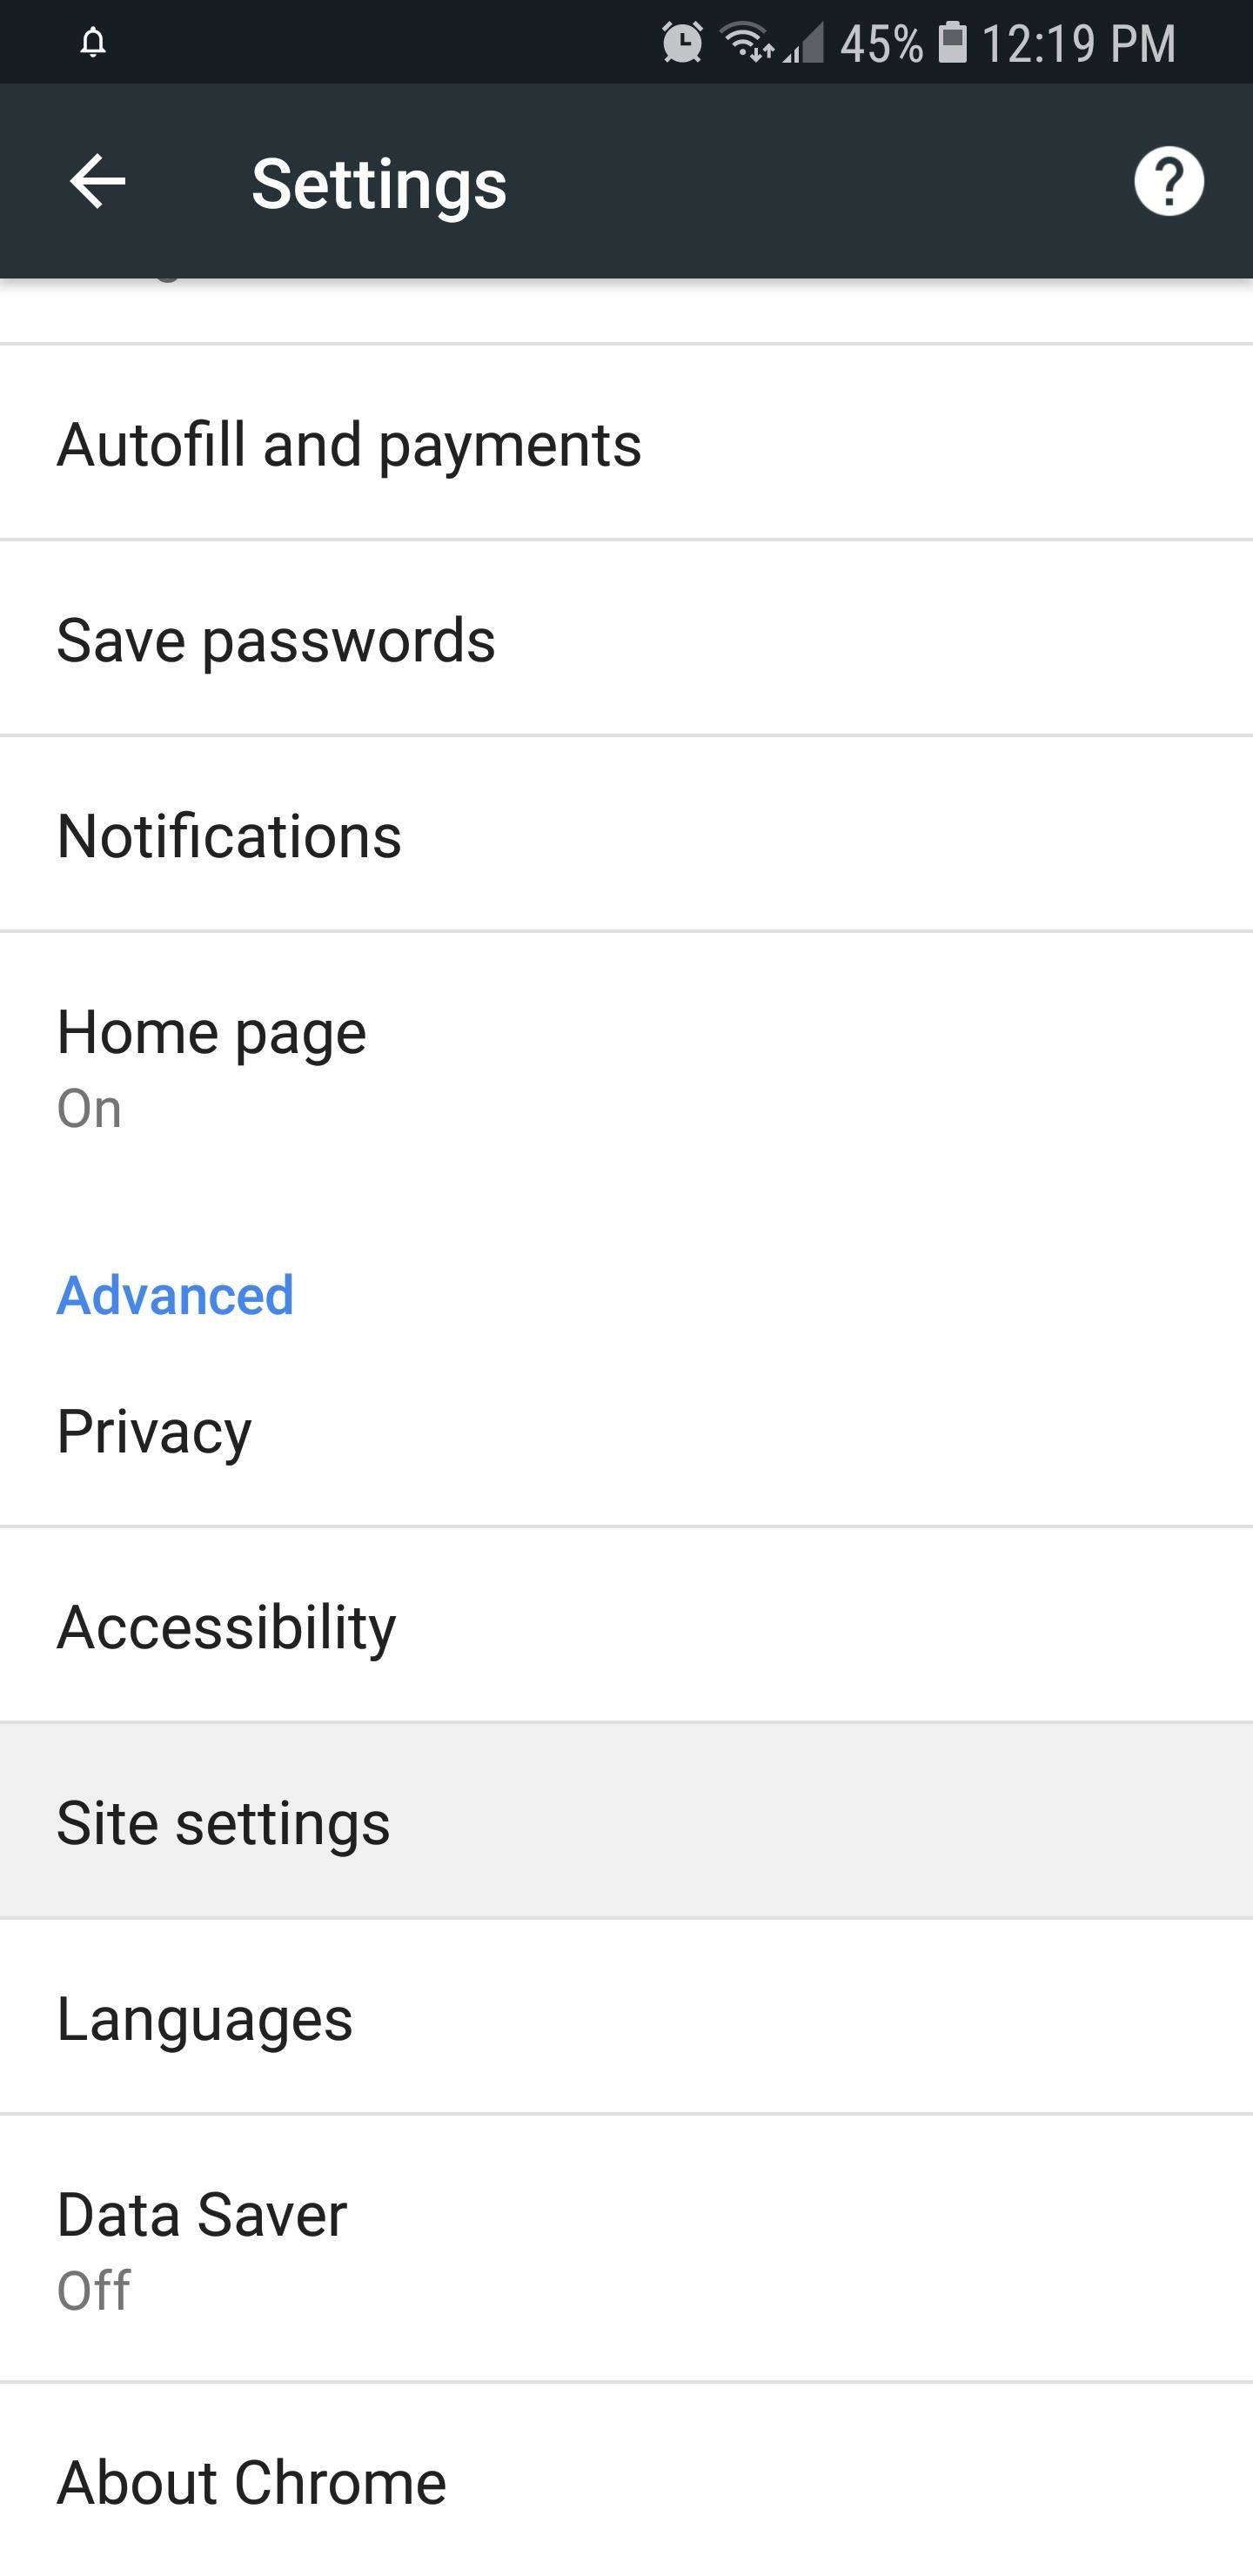 Chrome 101: How to Set Your Privacy & Choose Which Data to Share with Google